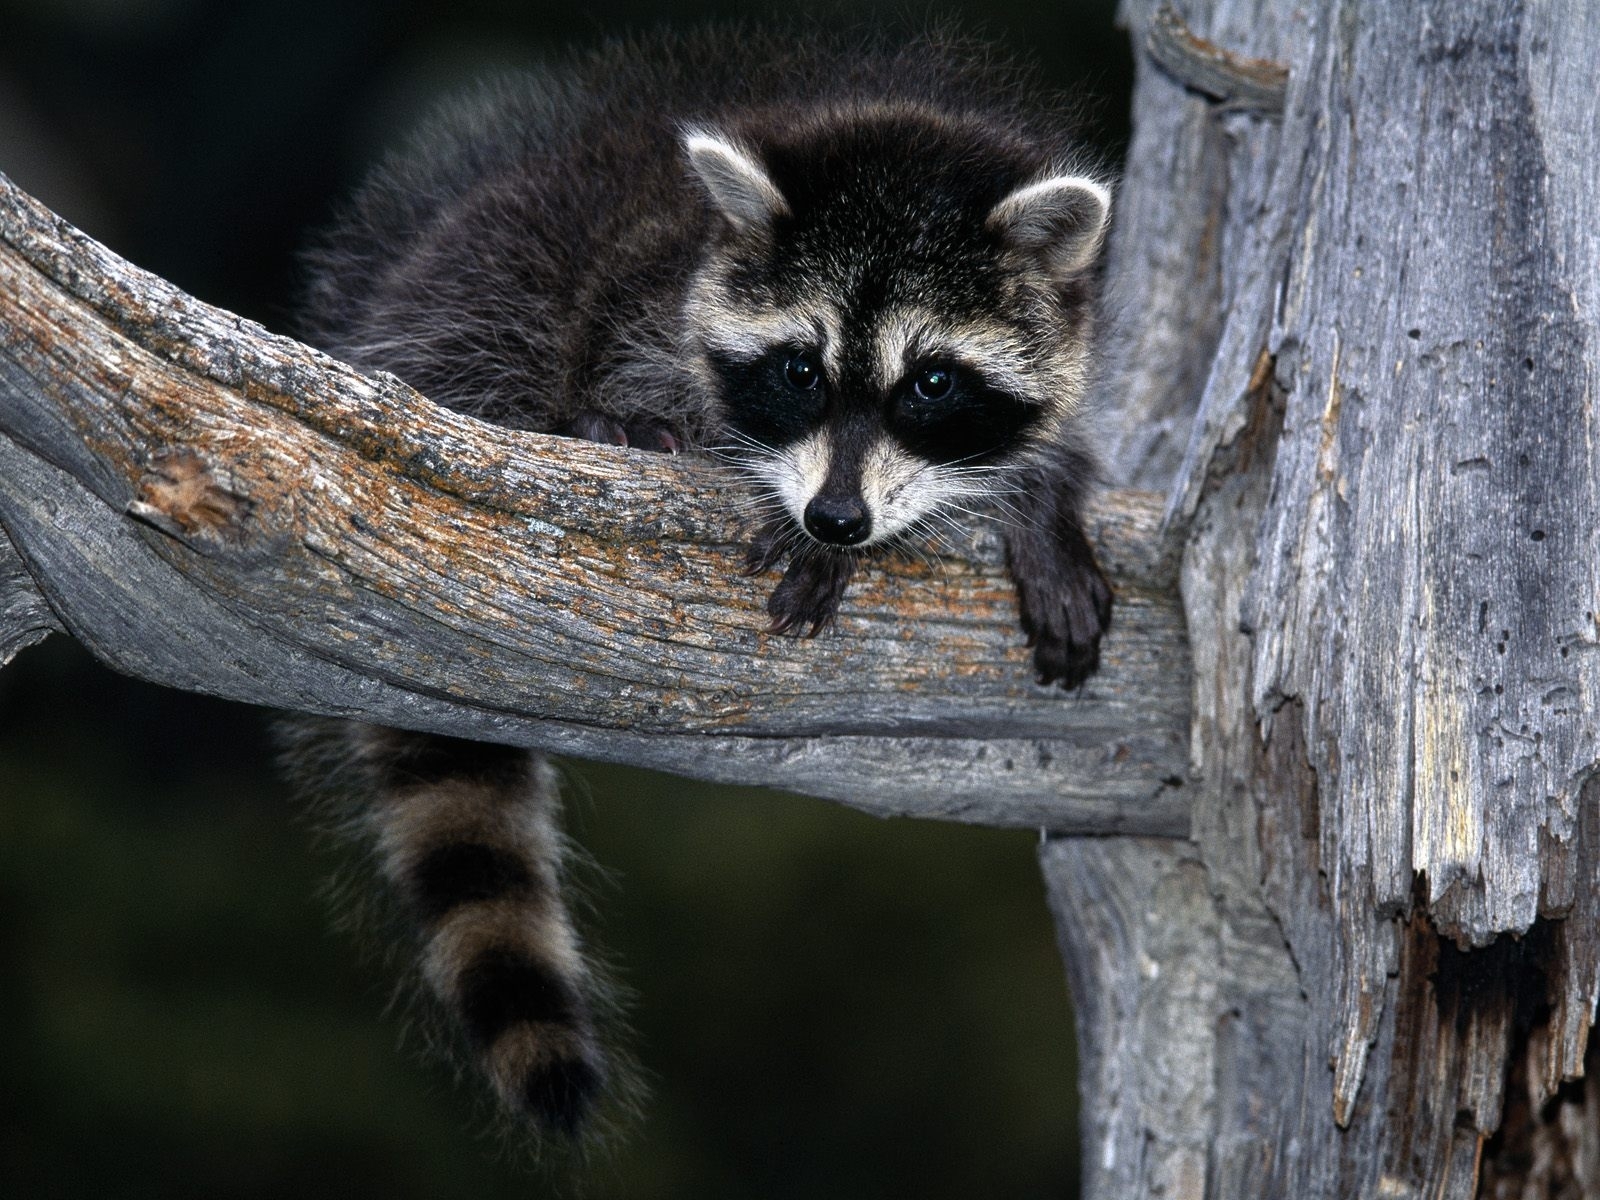 1080p Raccoons Hd Images